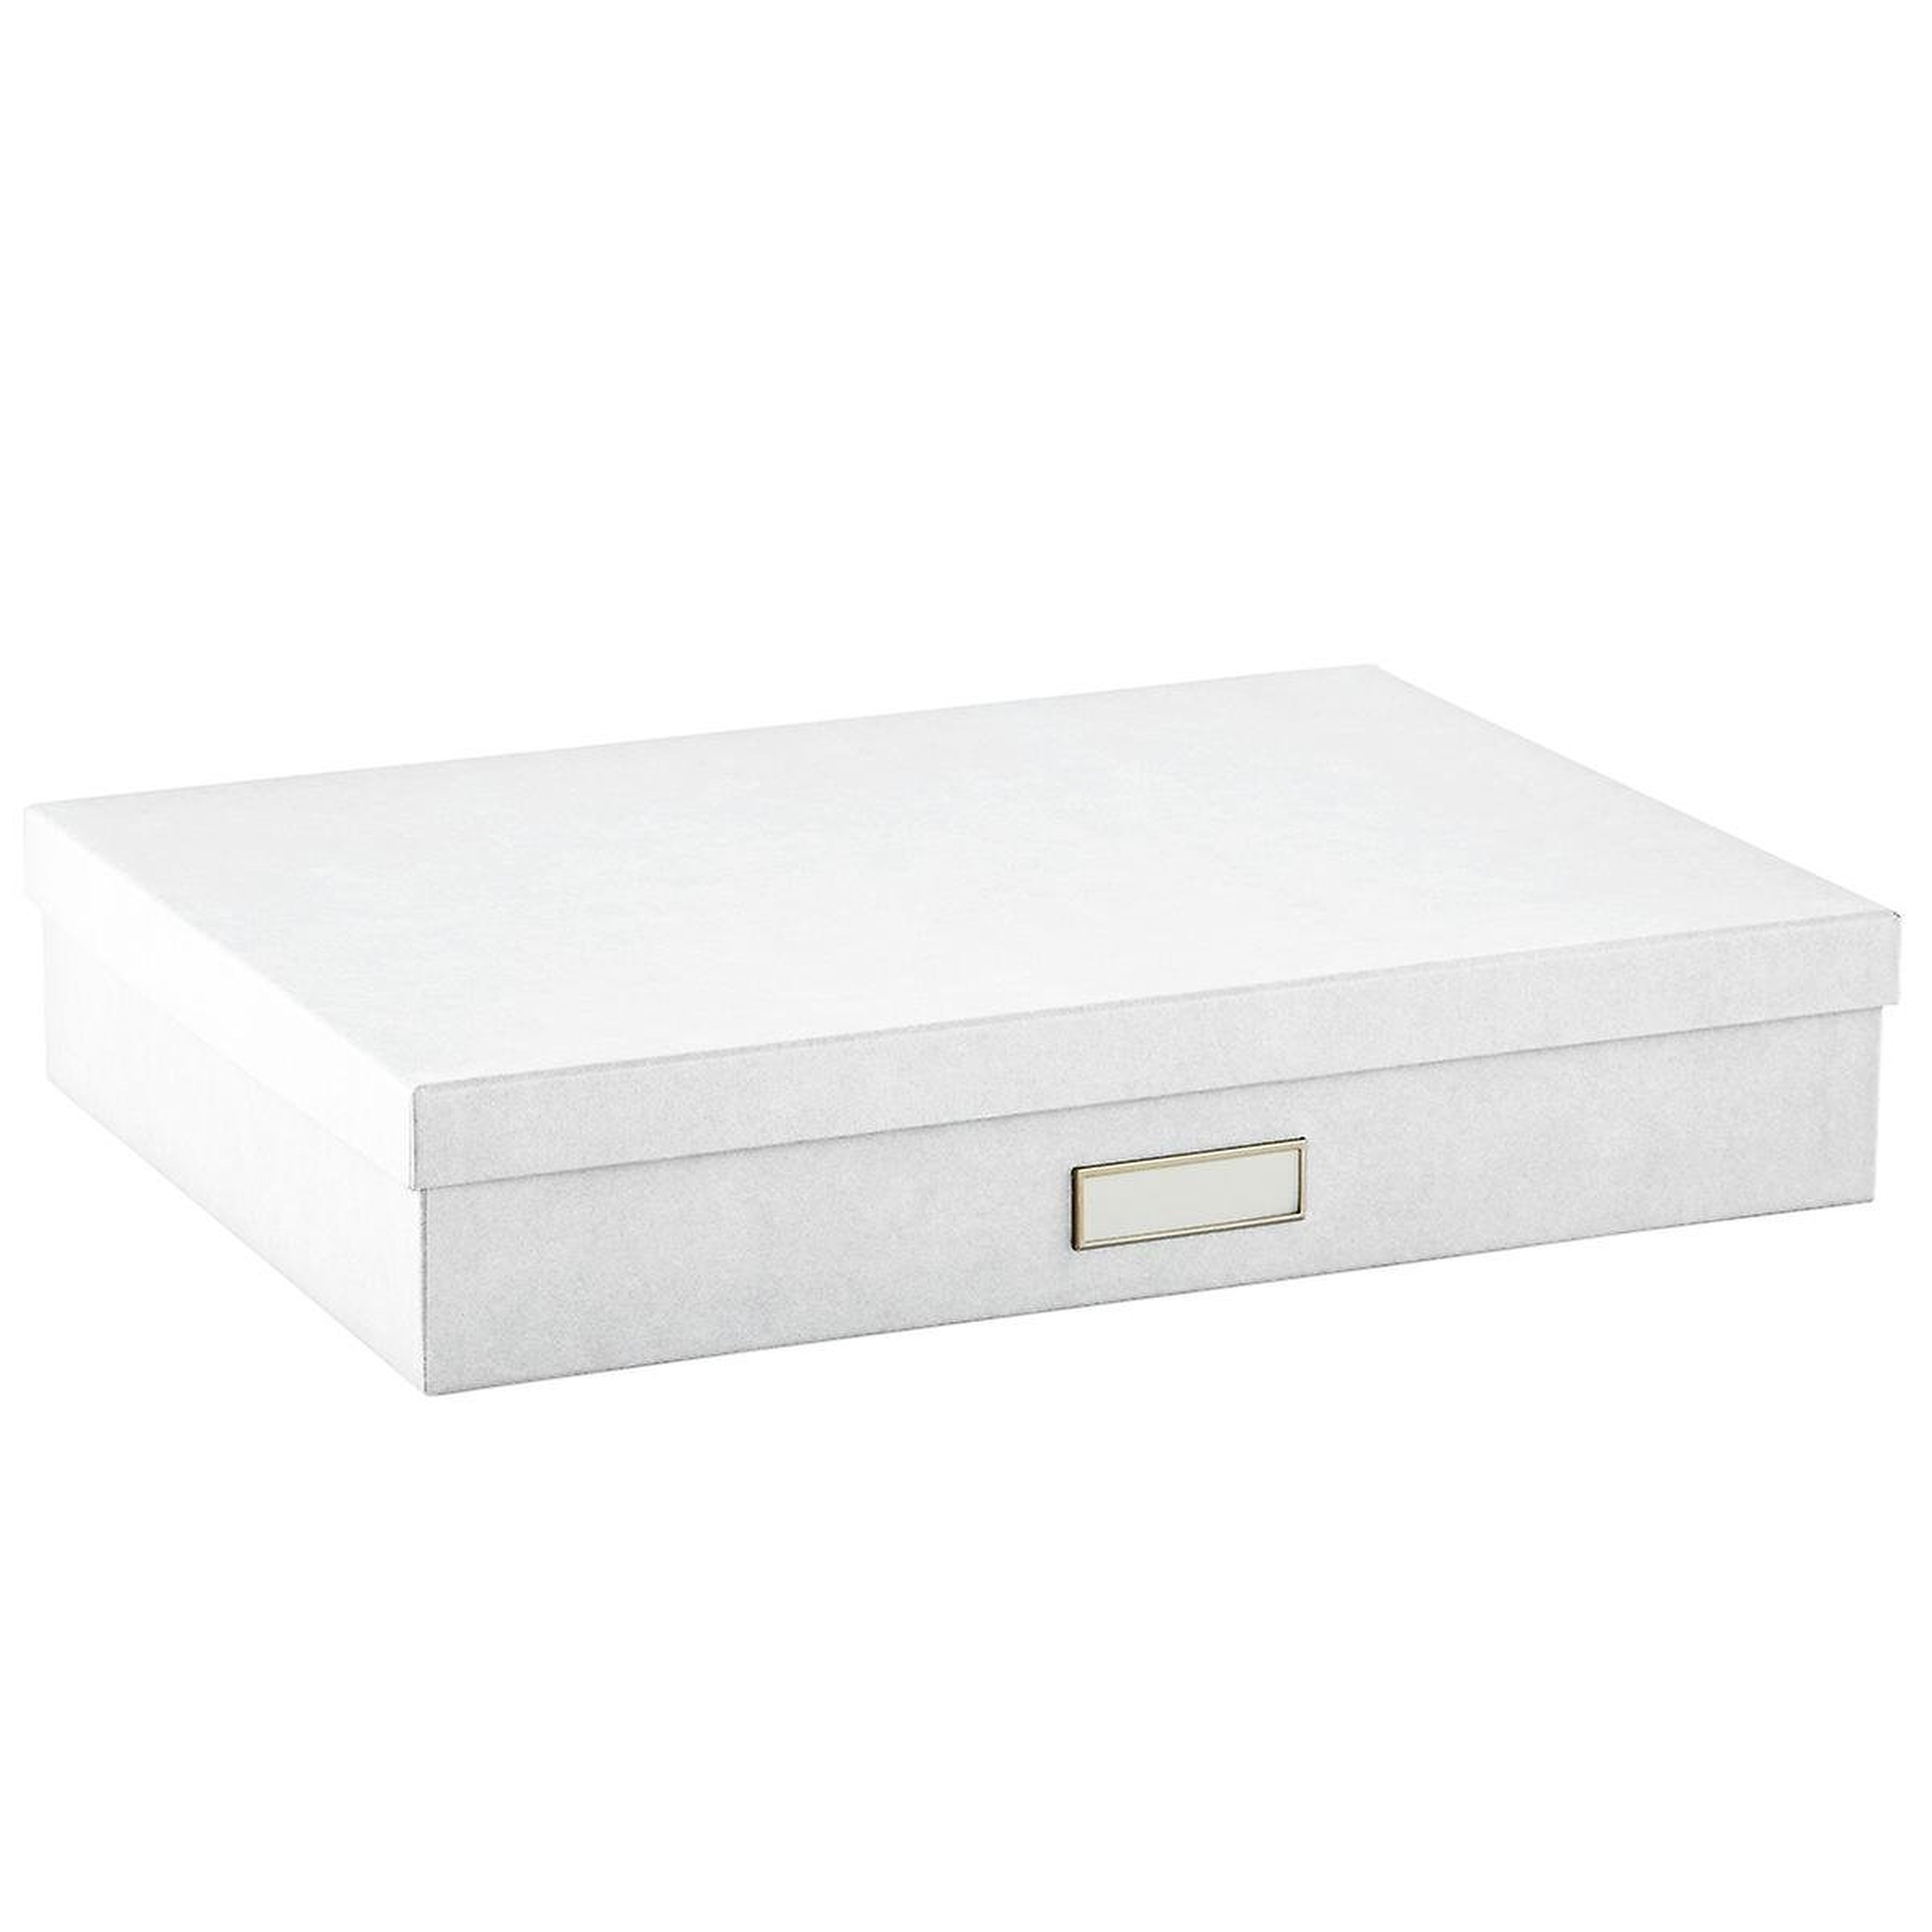 Bigso White Stockholm Office Storage Boxes - containerstore.com